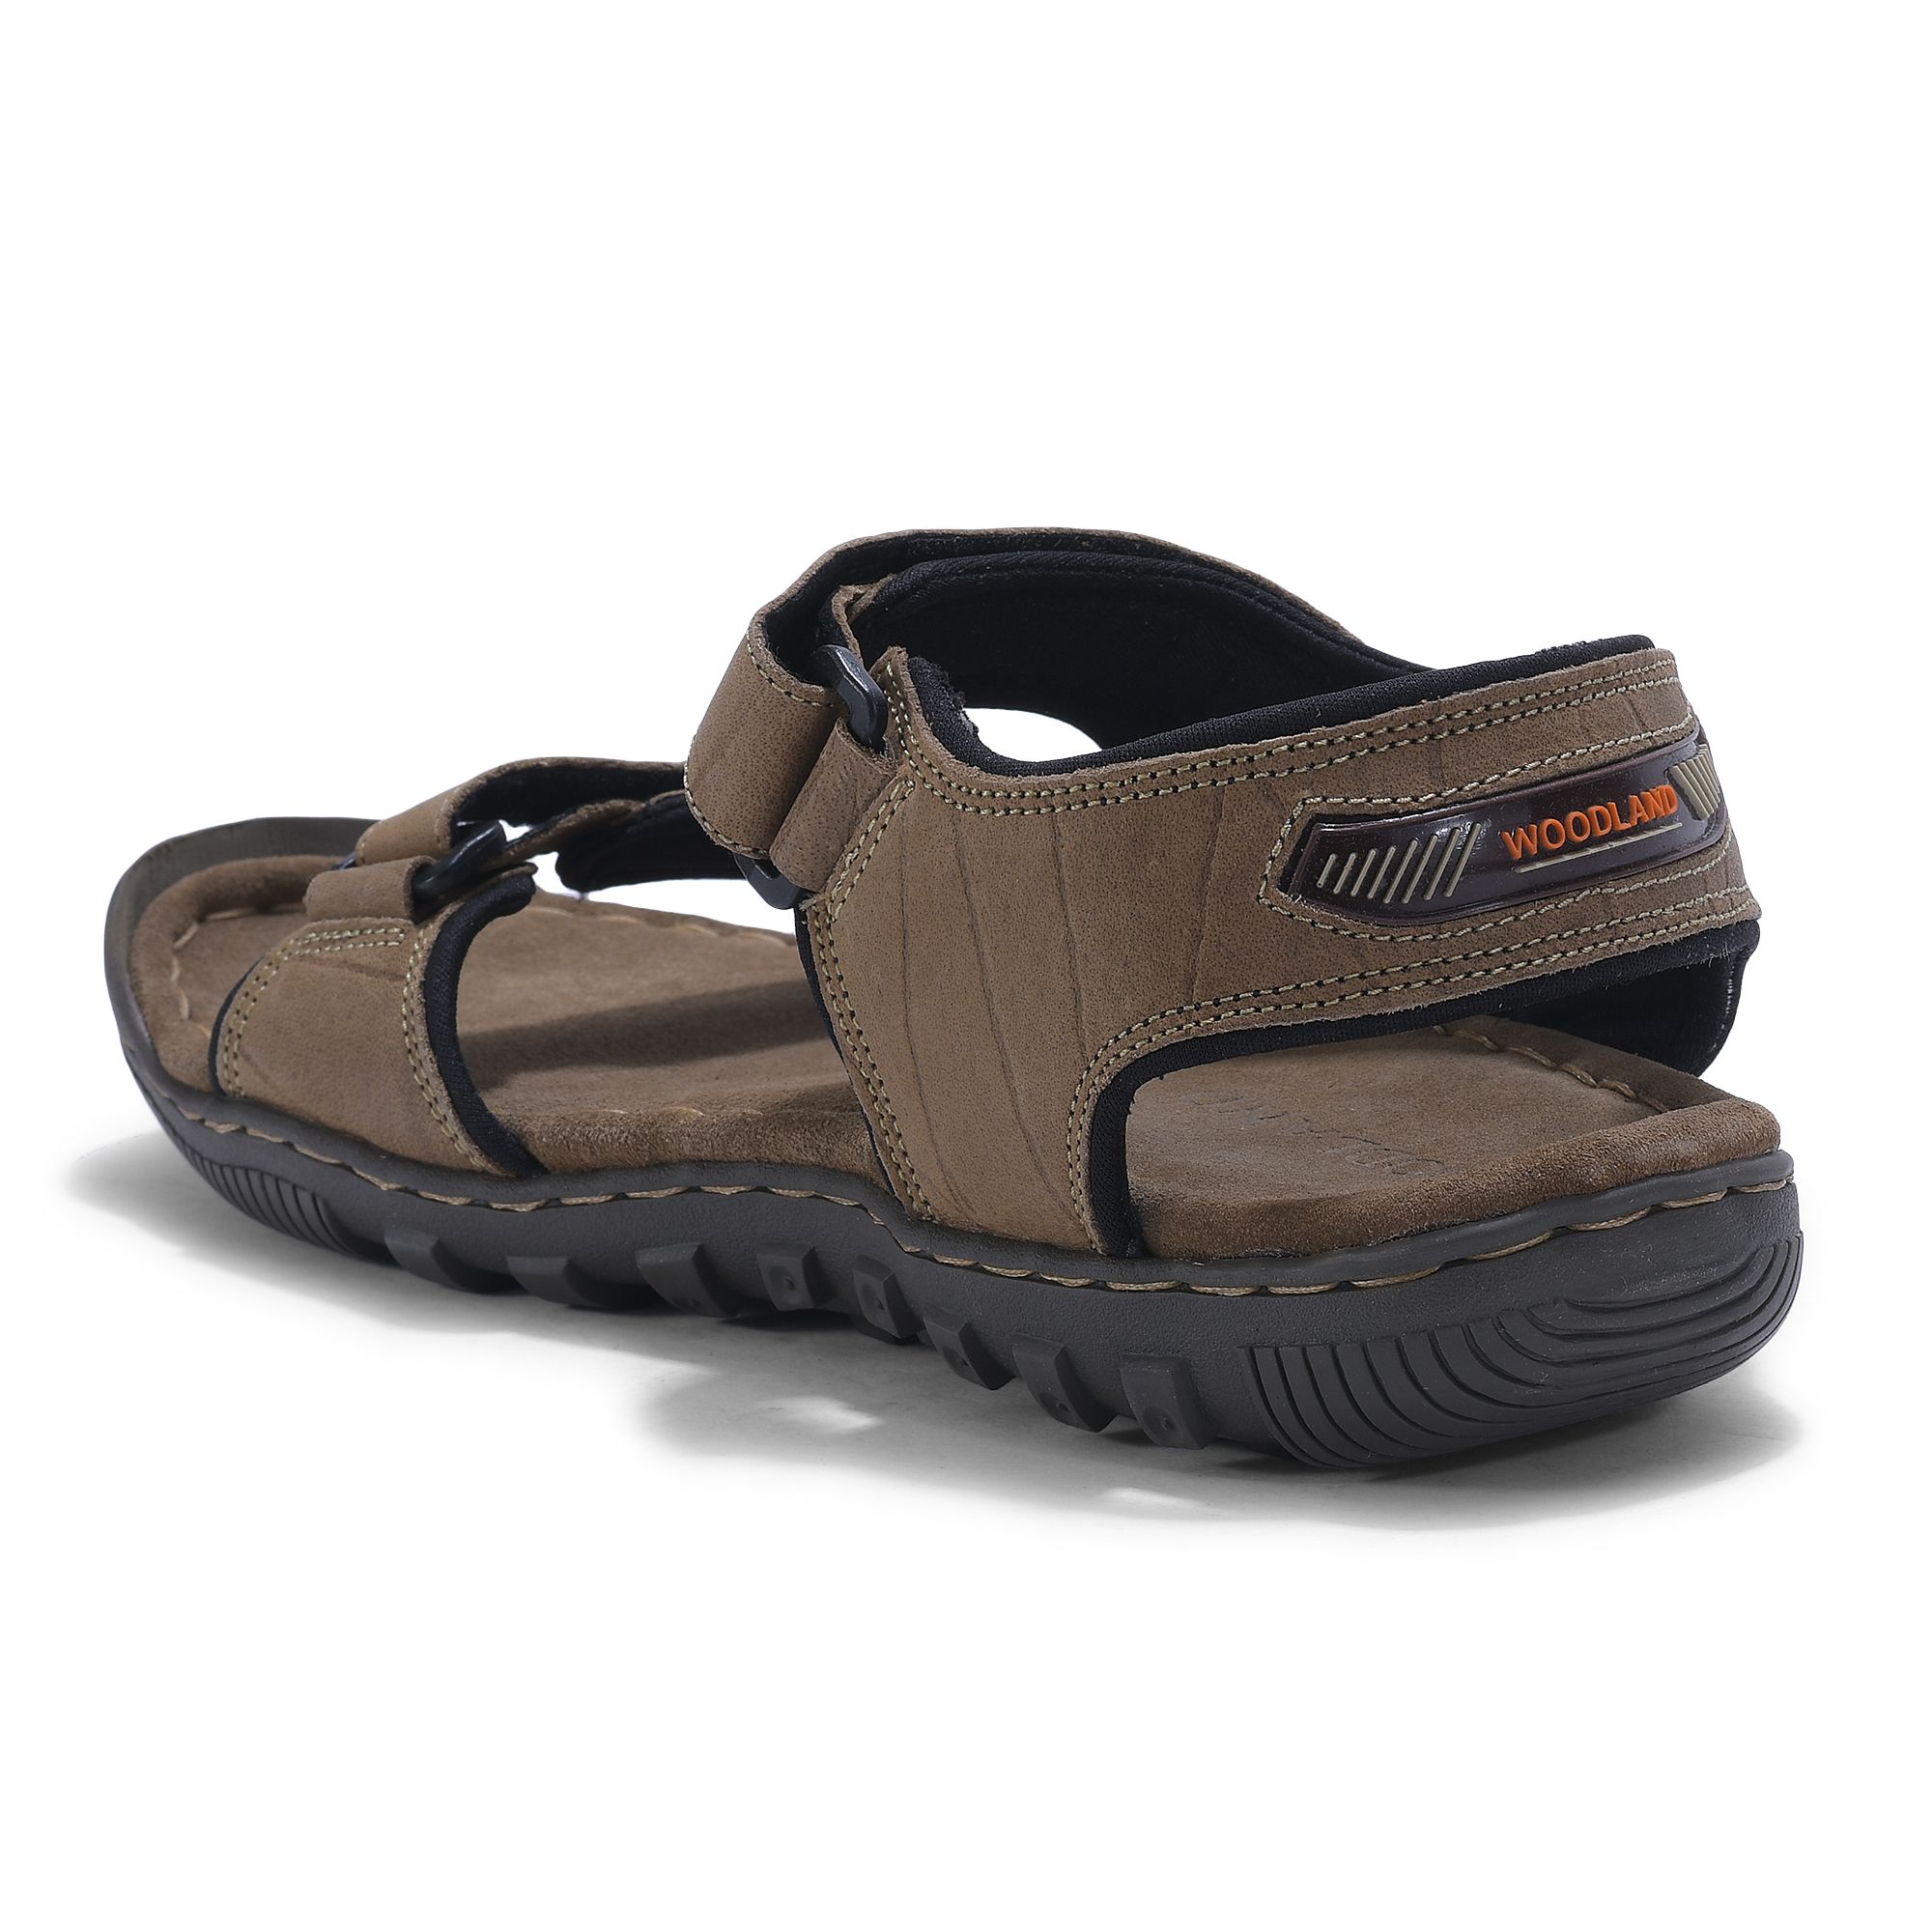 Woodland Men's CAMEL Leather Sandals and Floaters - 9 UK/India (43 EU) :  Amazon.in: Fashion